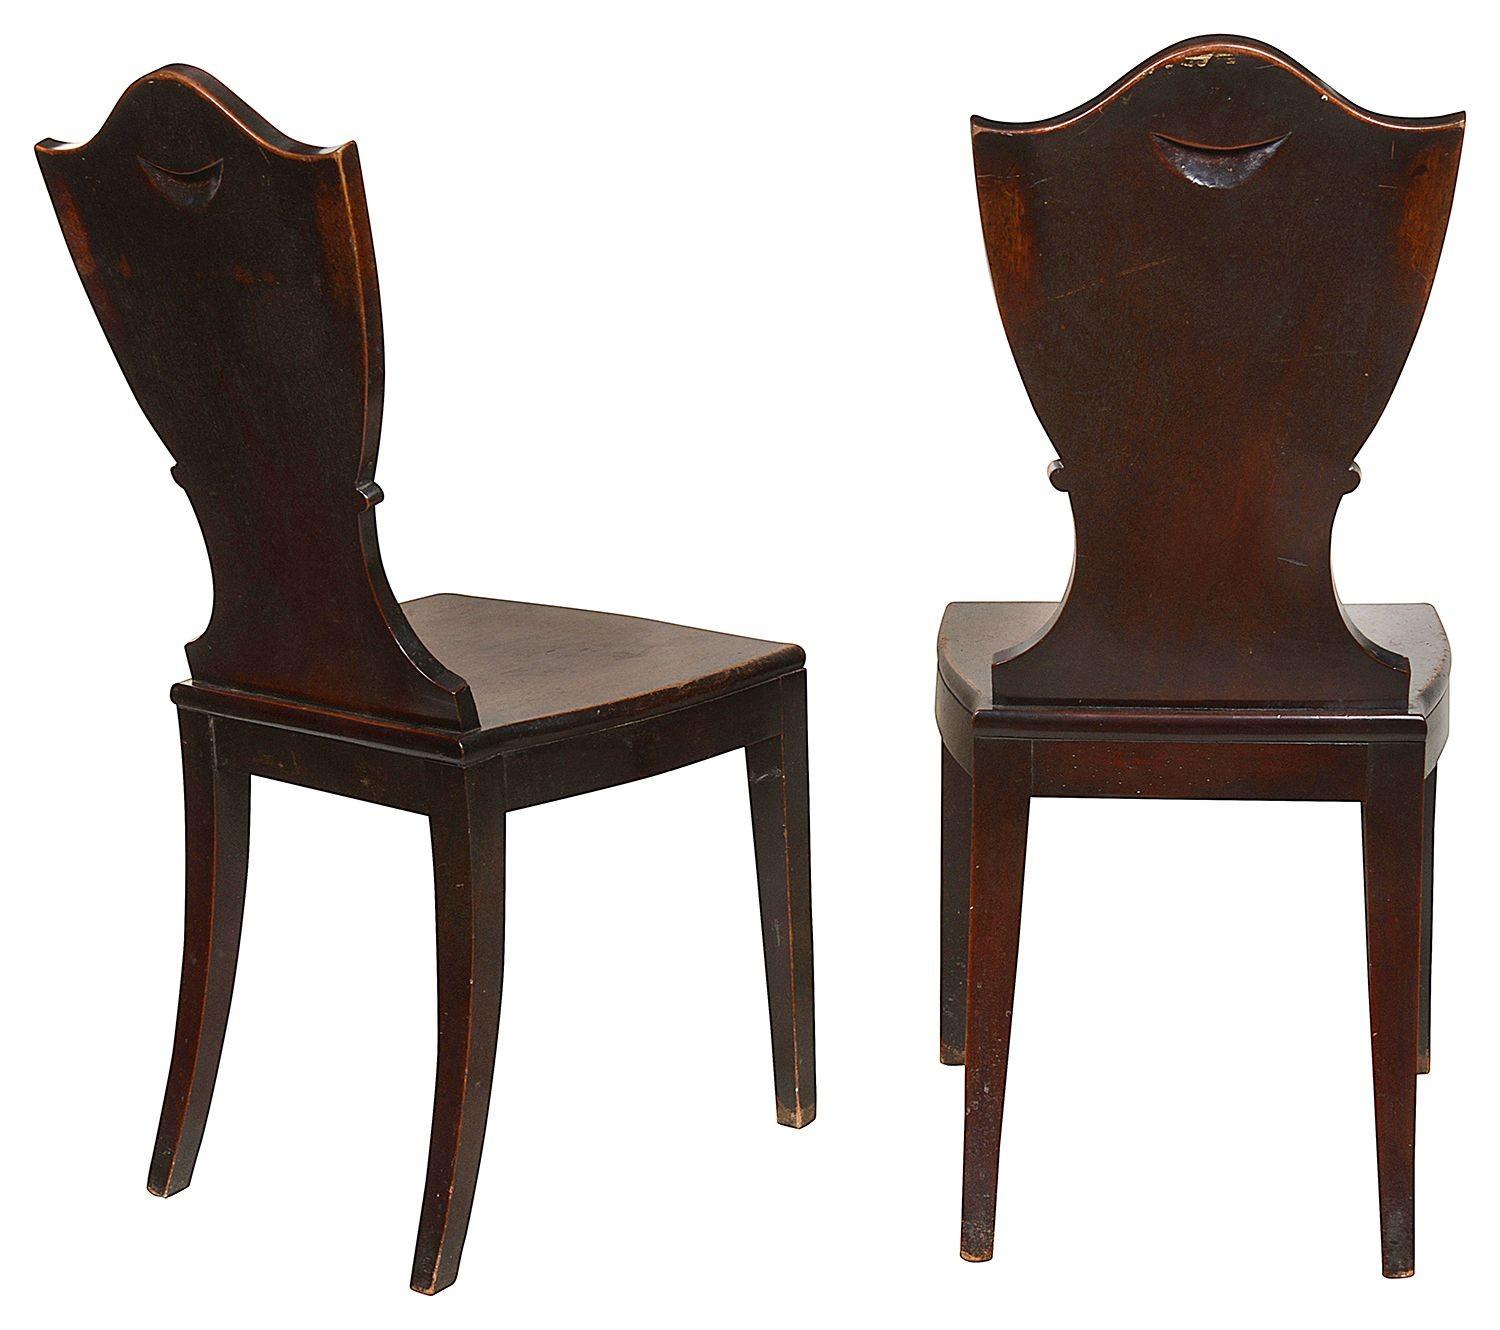 George III Pair 18th Century Mahogany Sheild Back Hall Chairs with Prince of Wales Feathers For Sale